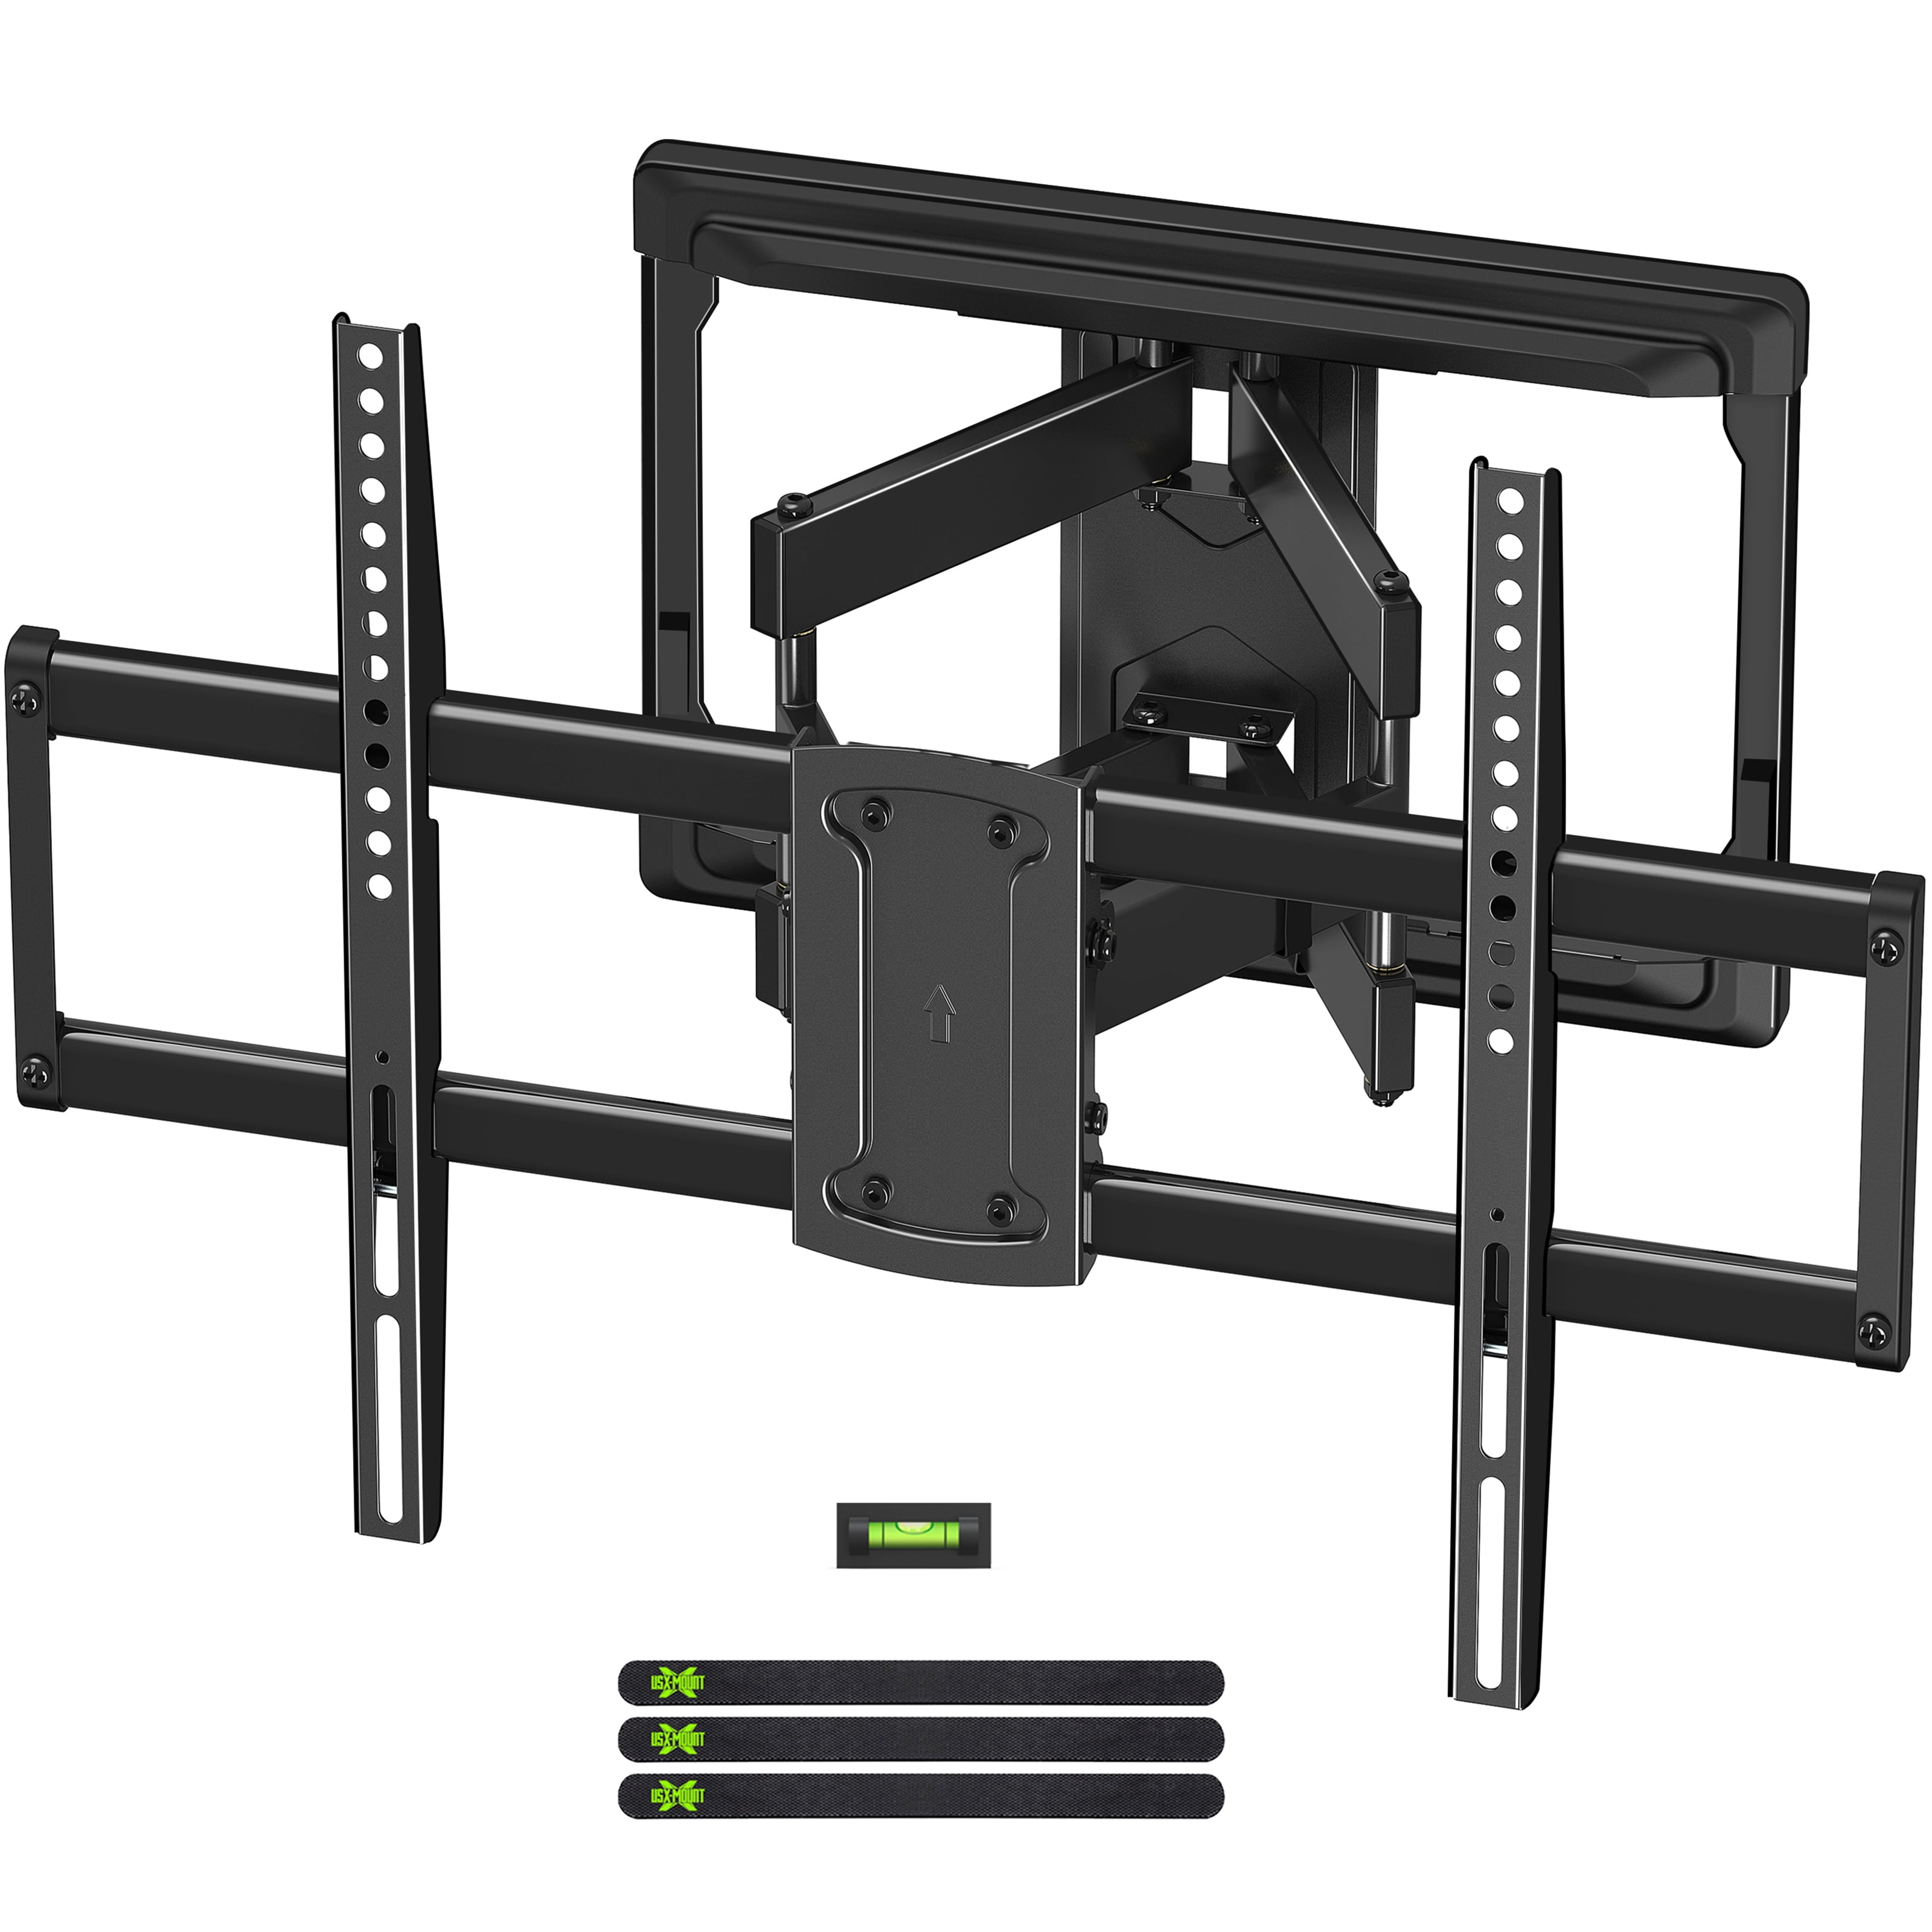 Easy Single Stud Install TV Mounts Perfect Center Design Up to VESA 400x400mm and 80 lbs USX MOUNT TV Wall Mount,Full Motion TV Mount for Most 26-55 Inch TVs Height Setting Bracket Extension Swivel and Tilt